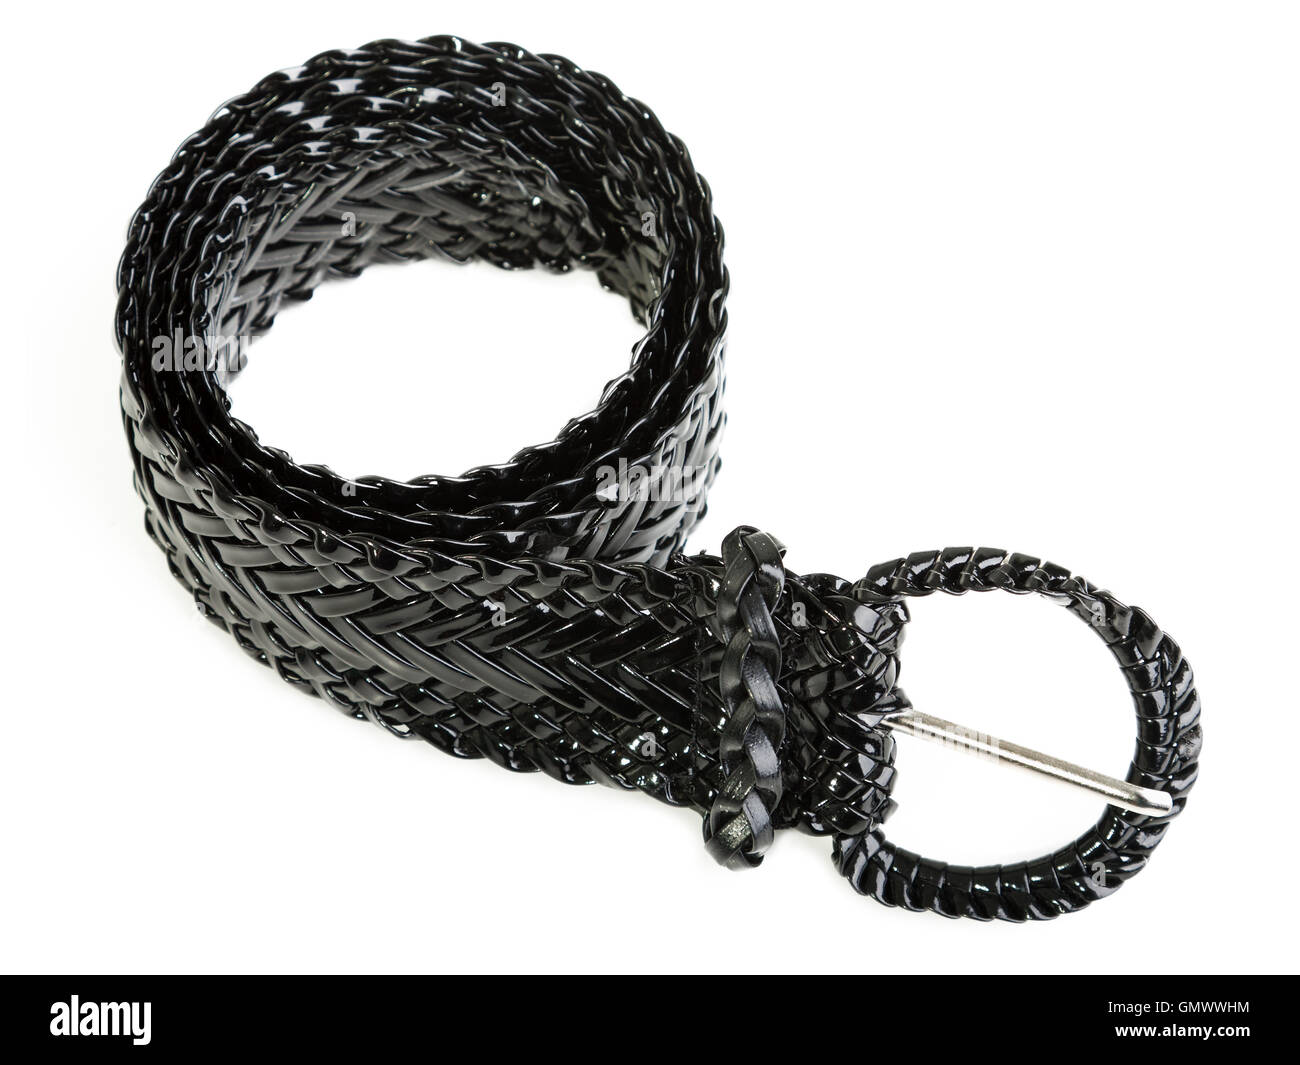 Black Braided Leather Strap Background Stock Photo, Picture and Royalty  Free Image. Image 107677424.